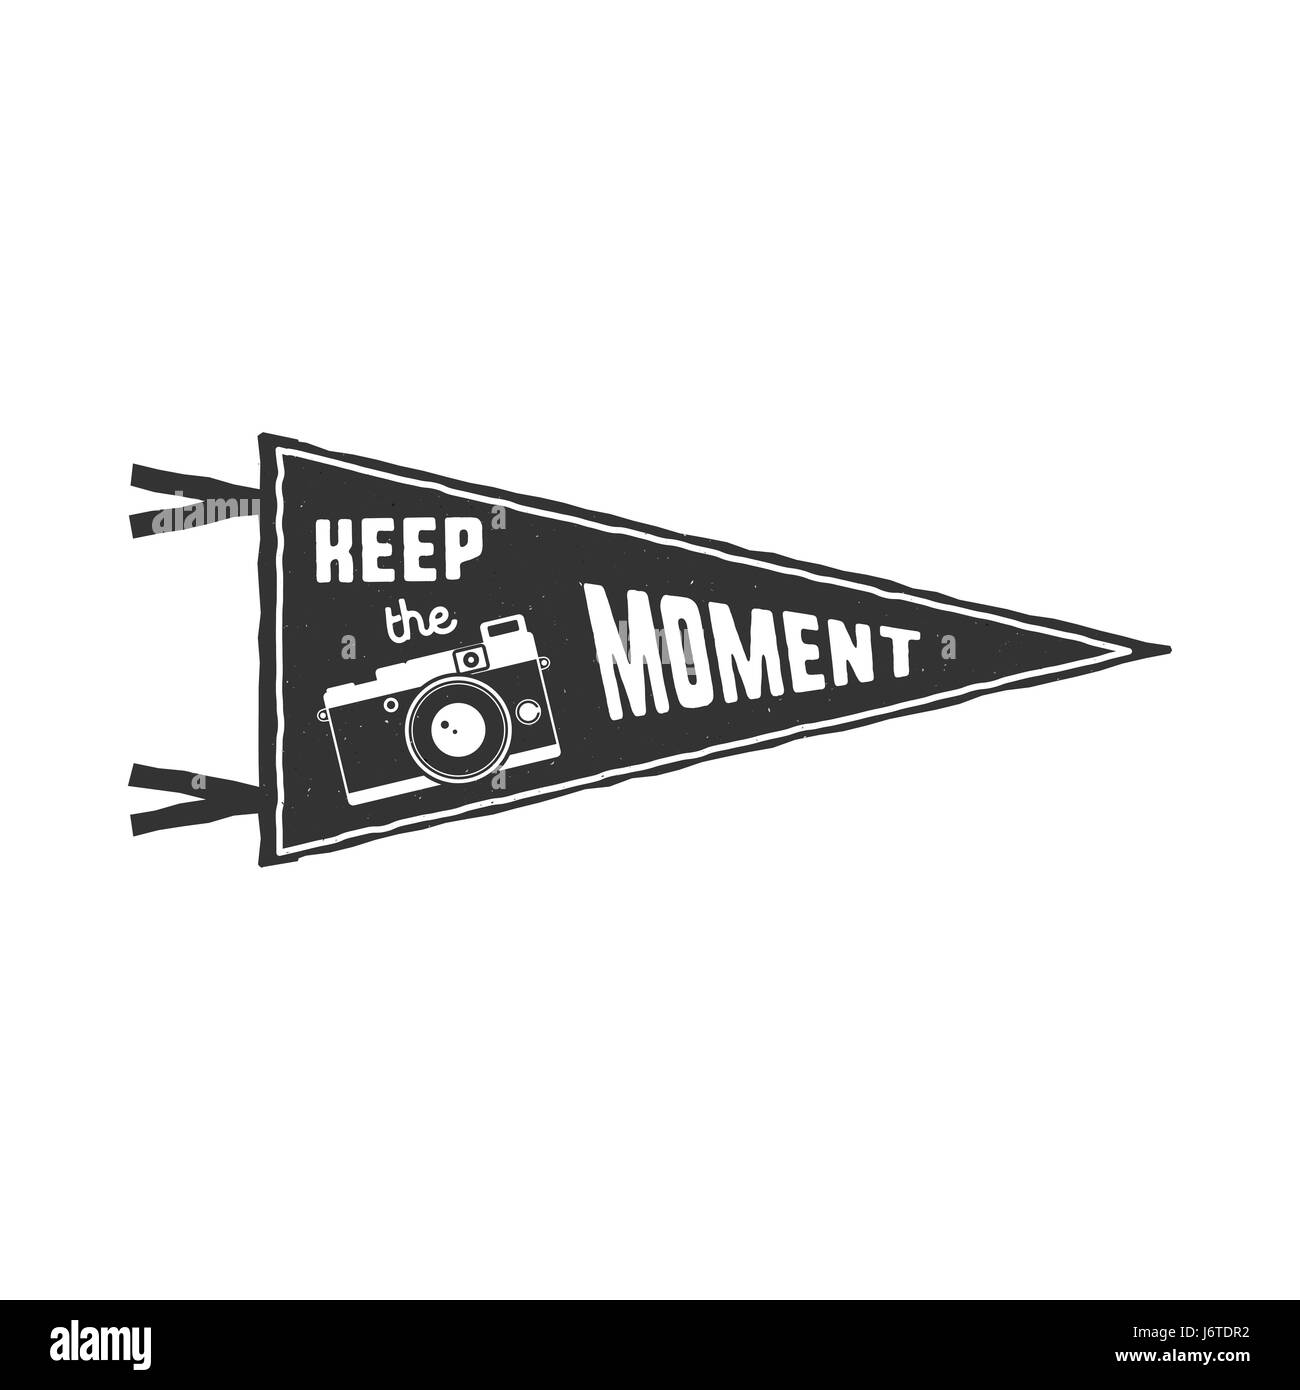 Keep the moment pennant. Flag pendant design in retro monochrome style. Drawing for prints on t-shirts, mugs and other branding identity. Stock vector illustration Stock Vector